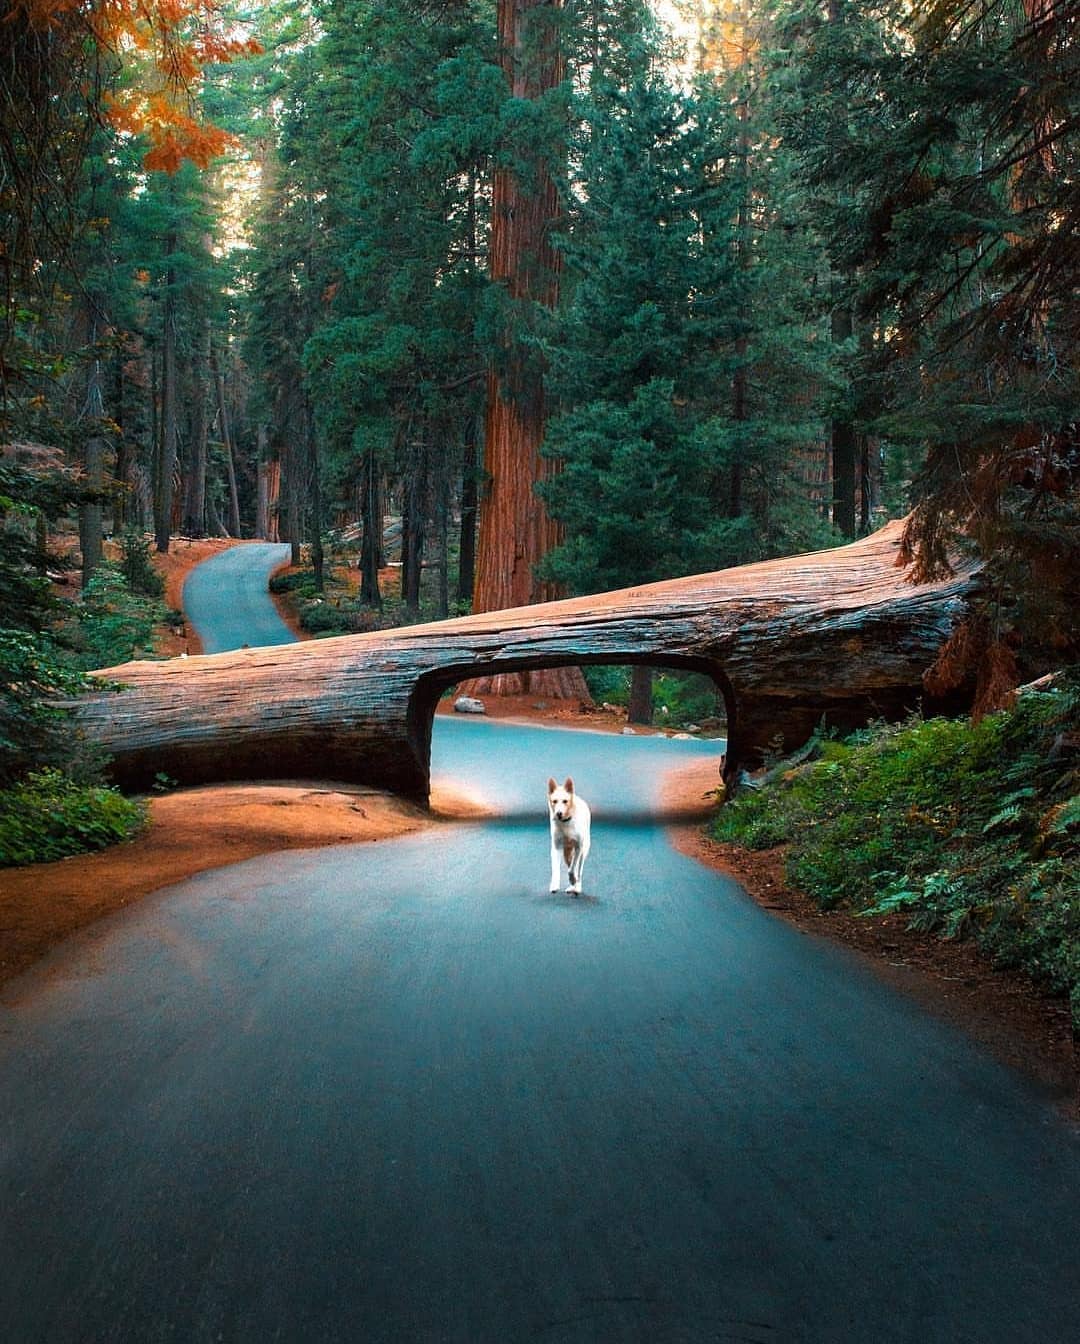 Top 7 National Parks in the USA - Sequoia National Park